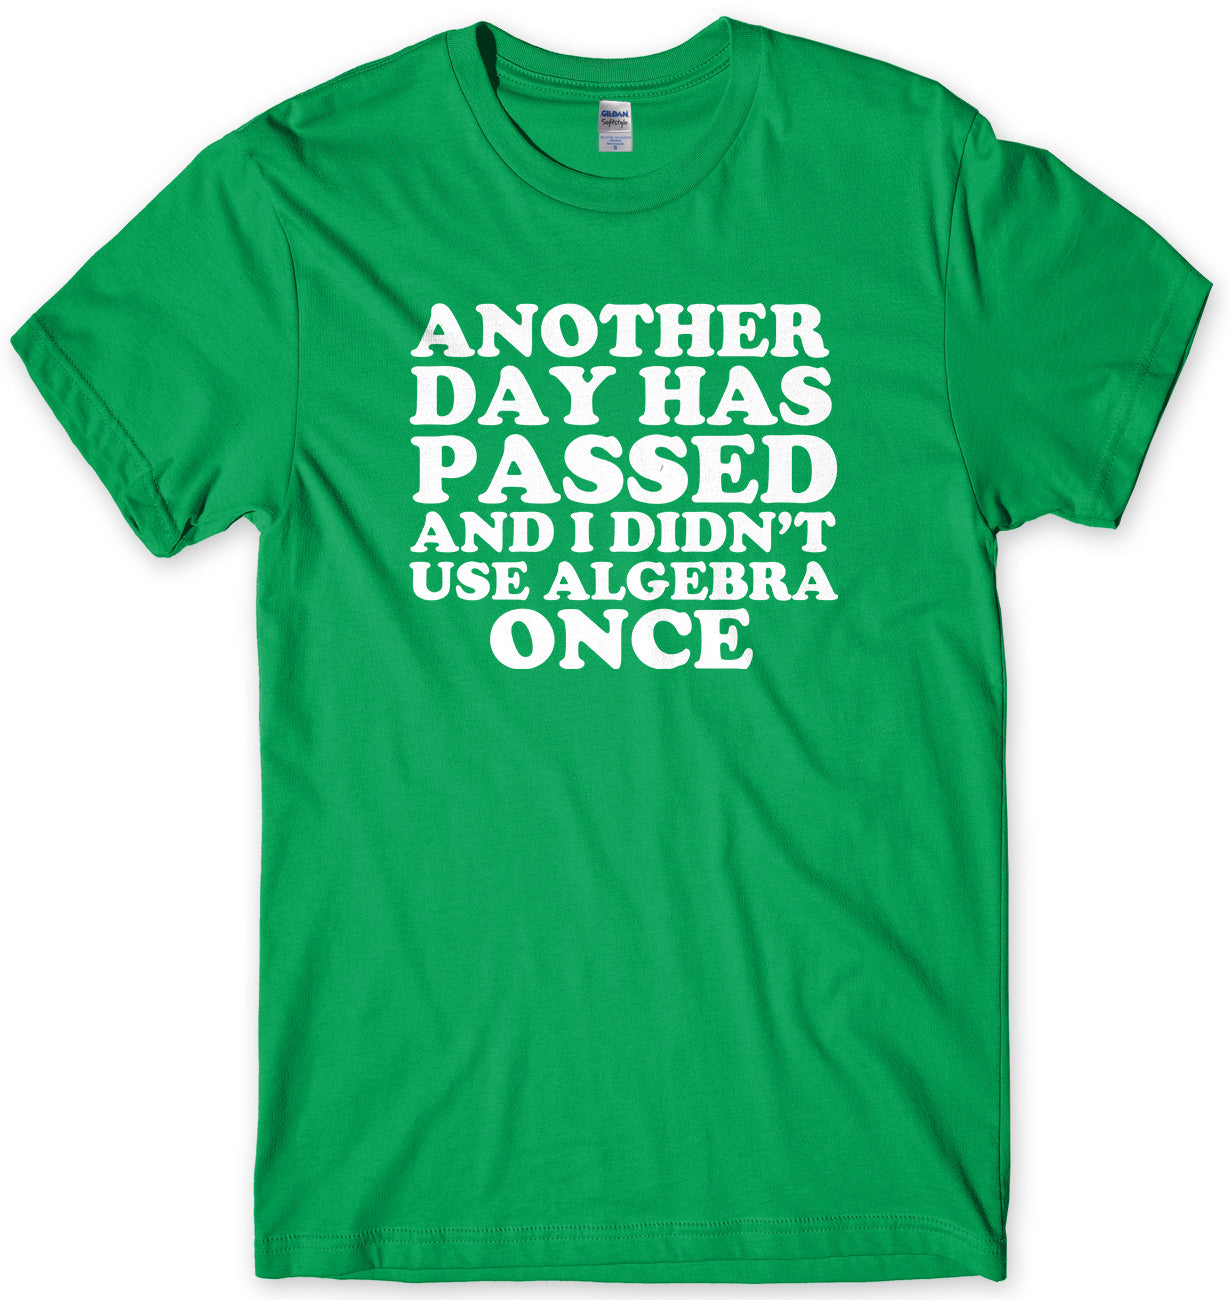 Another Day Has Passed And I Didn't Use Algebra Once Mens Unisex T-Shirt - StreetSide Surgeons